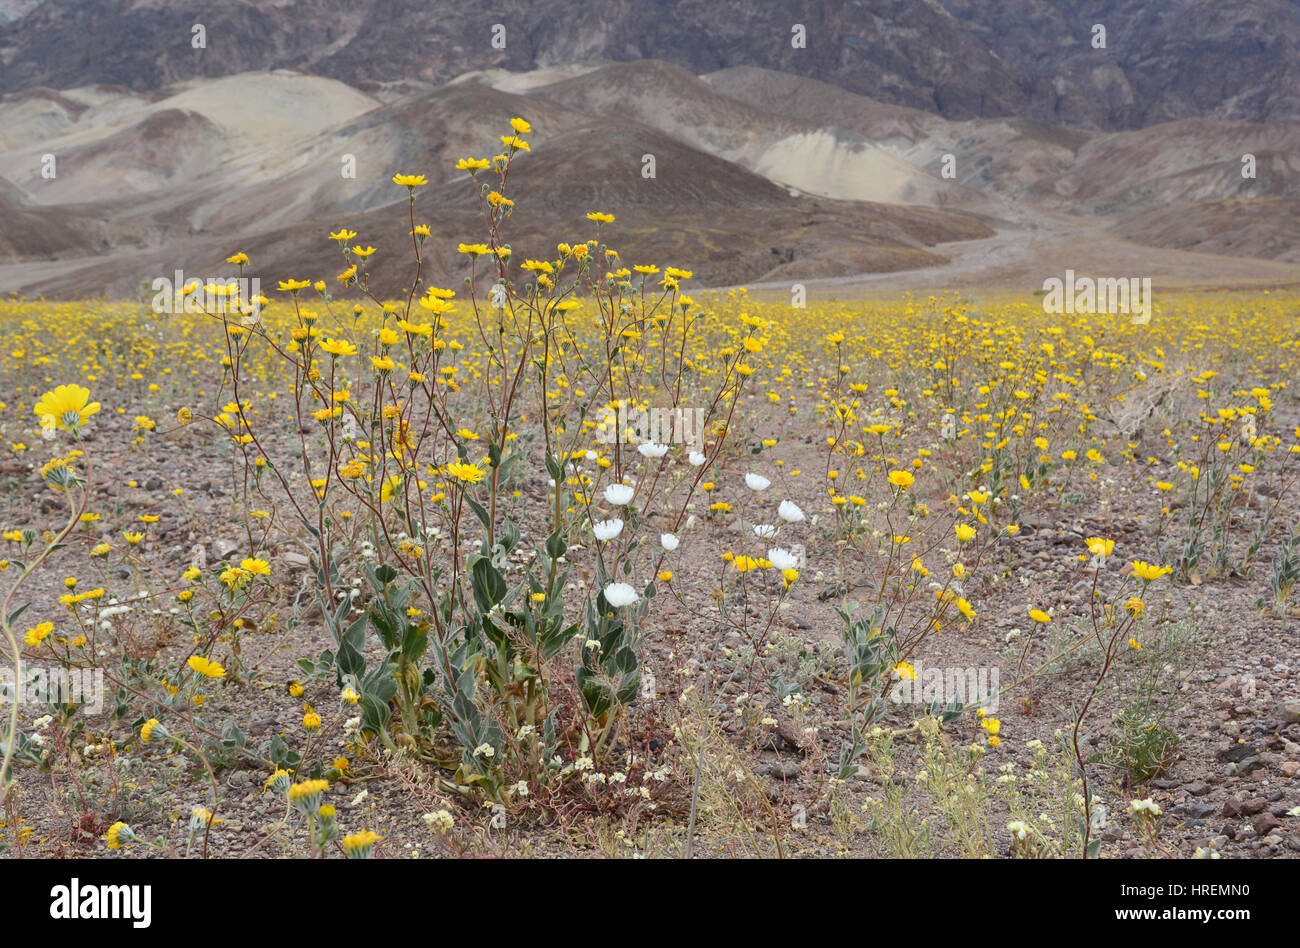 Close-up of a cluster of yellow and white wildflowers with more yellow flowers and a mountain in the background. Springtime in Death Valley NP. Stock Photo